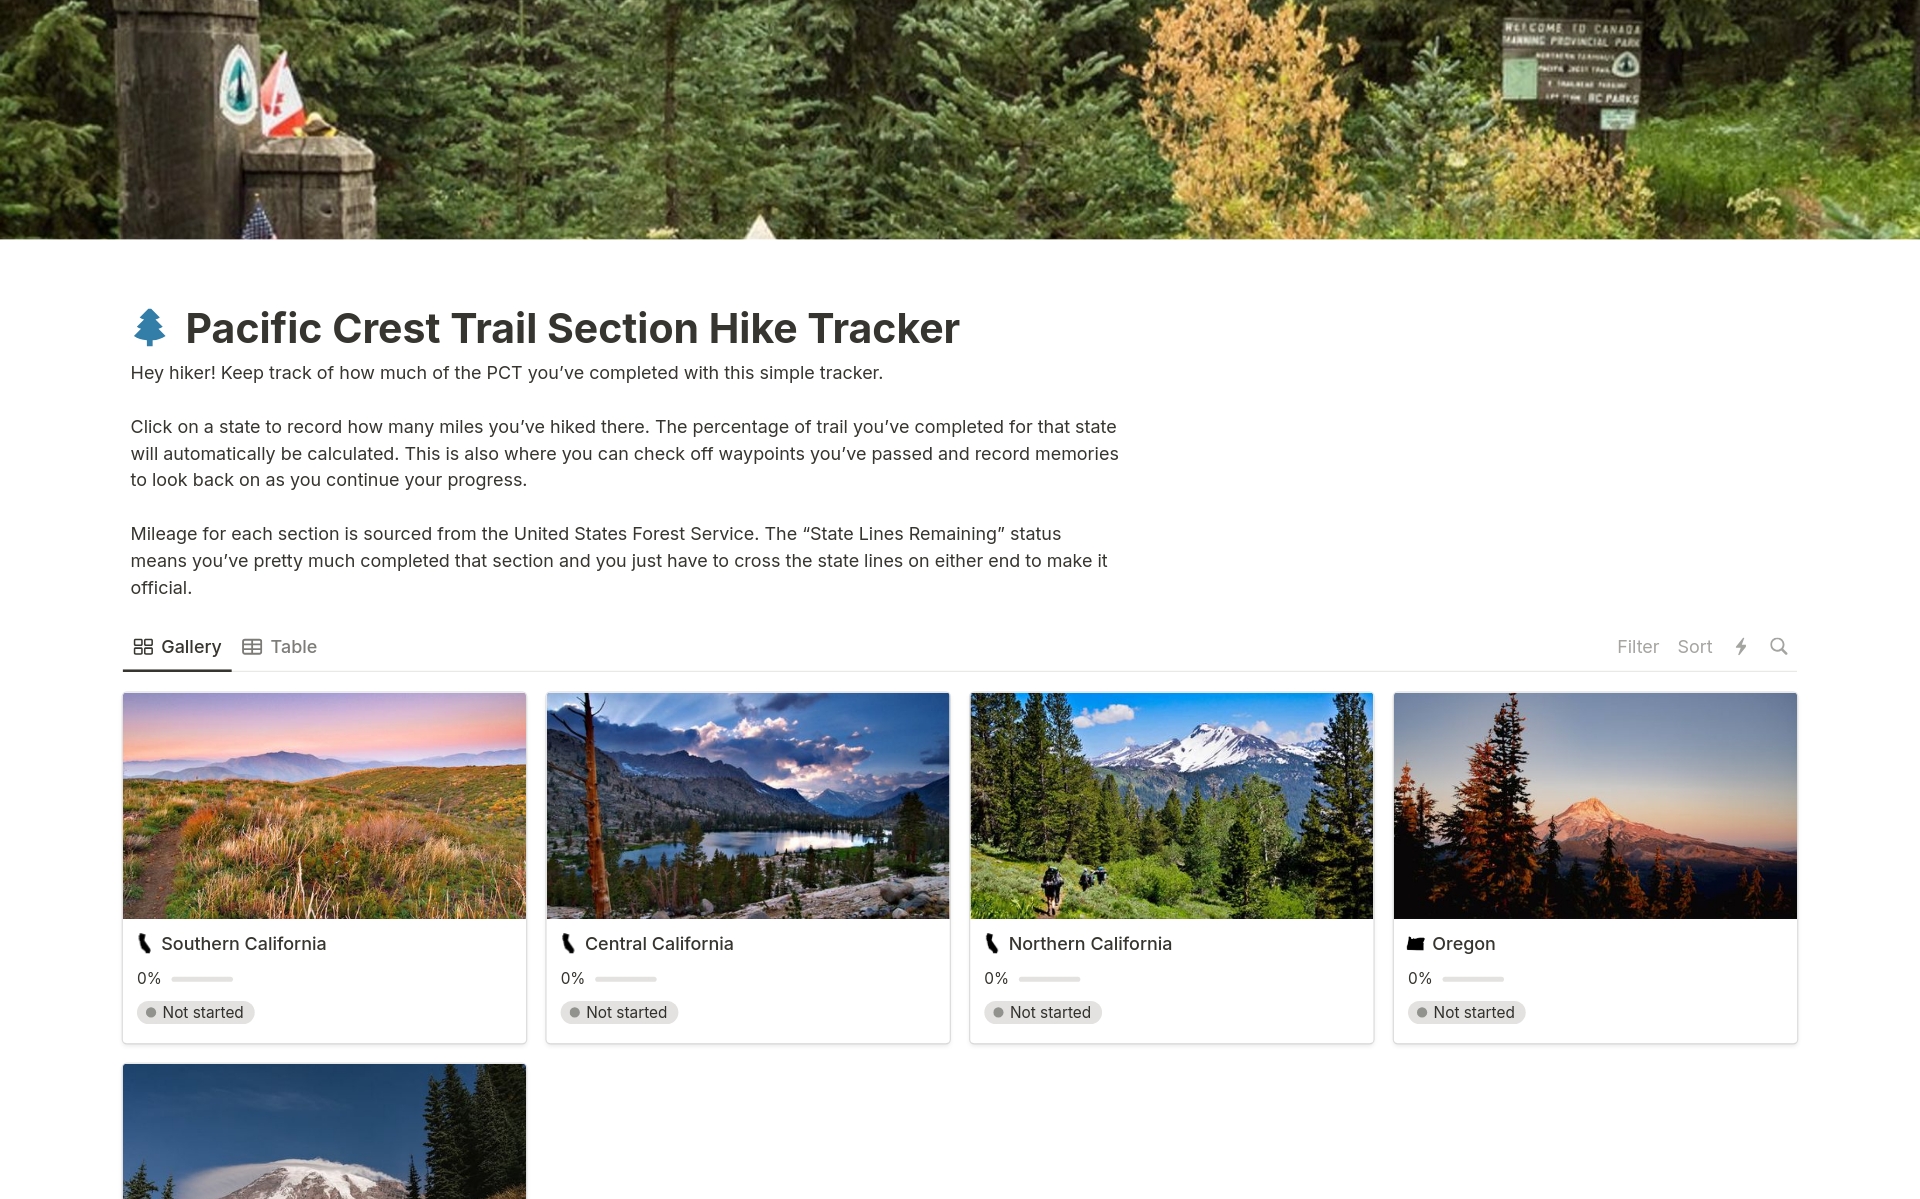 The Pacific Crest Trail is long. Hiking it in sections can take decades. This Notion template makes it easy check off waypoints, record memories, and log miles completed all on one place.